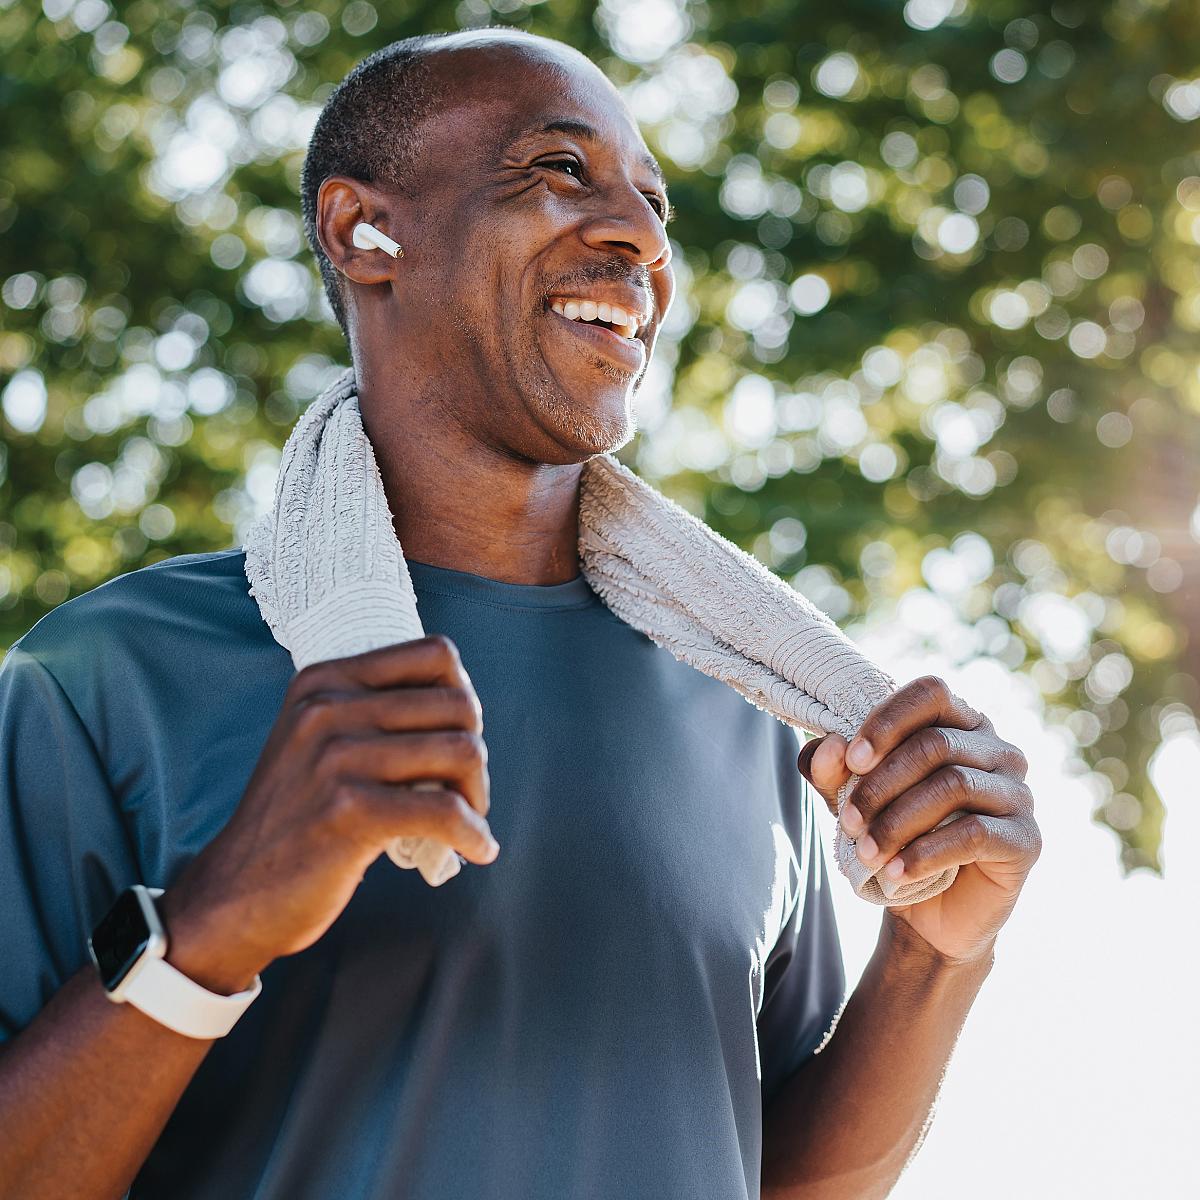 Smiling man with towel around his neck after exercising